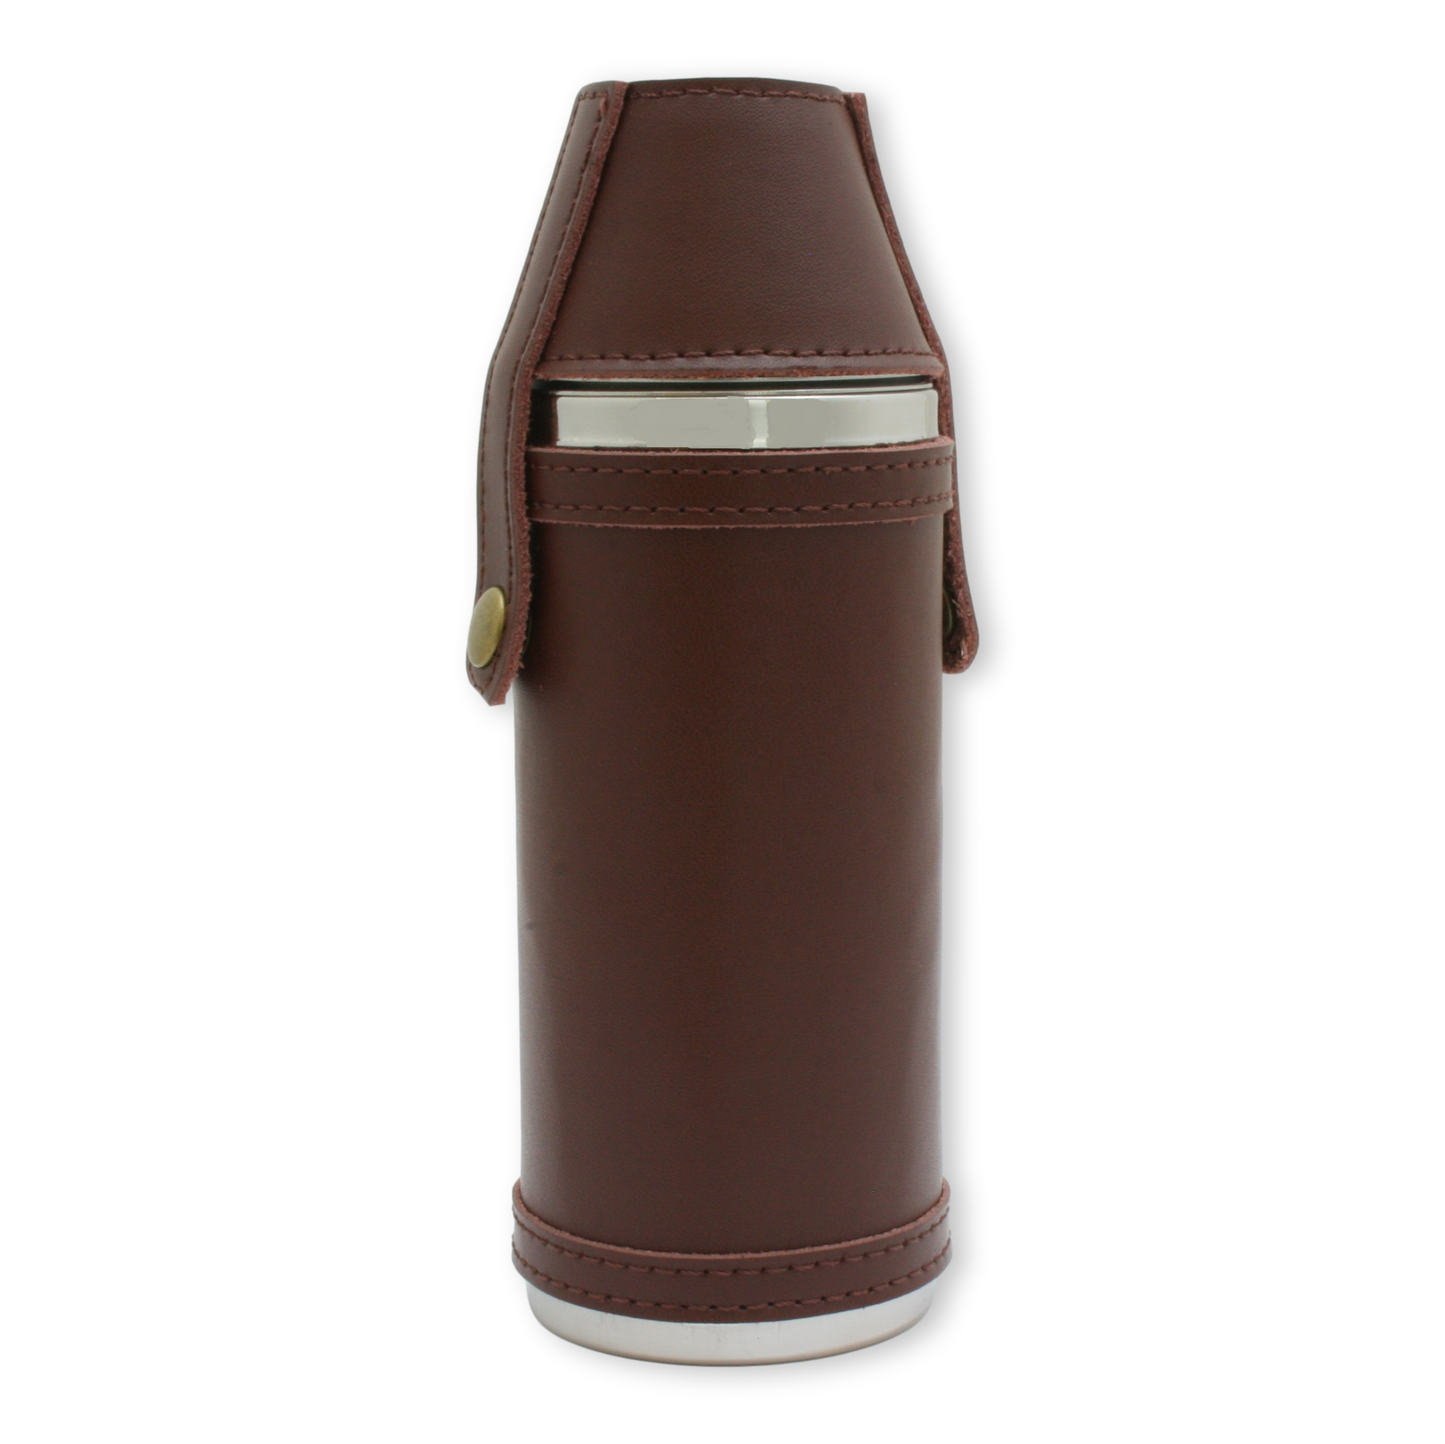 Leather Bound Flask and Cups